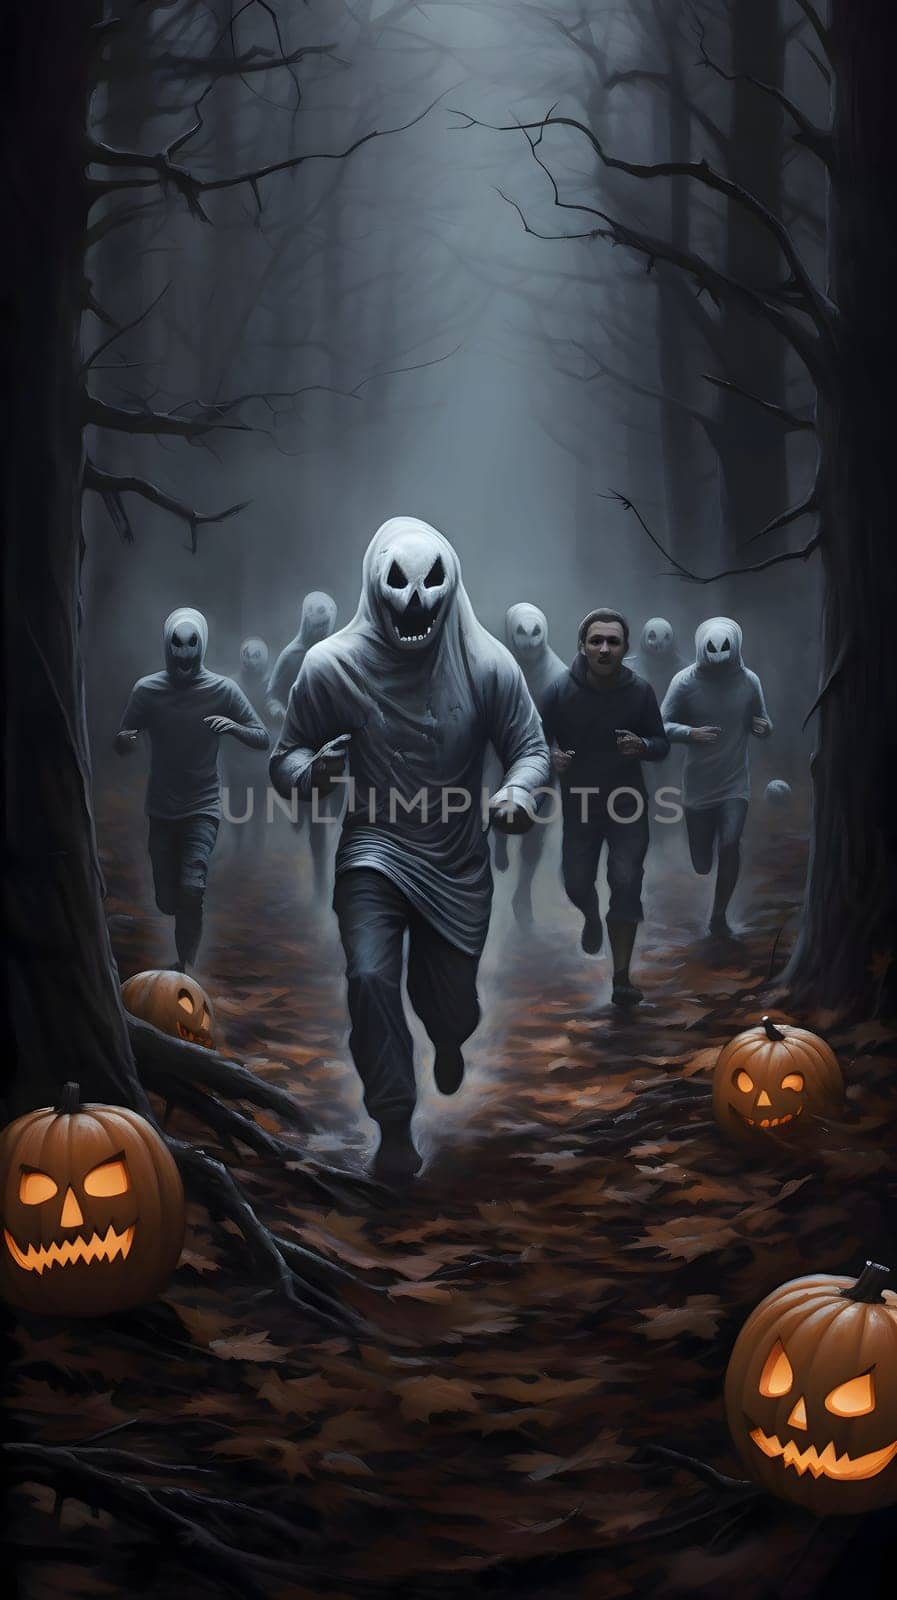 Glowing jack-o-lantern pumpkins in the forest and running monsters, a Halloween image. by ThemesS